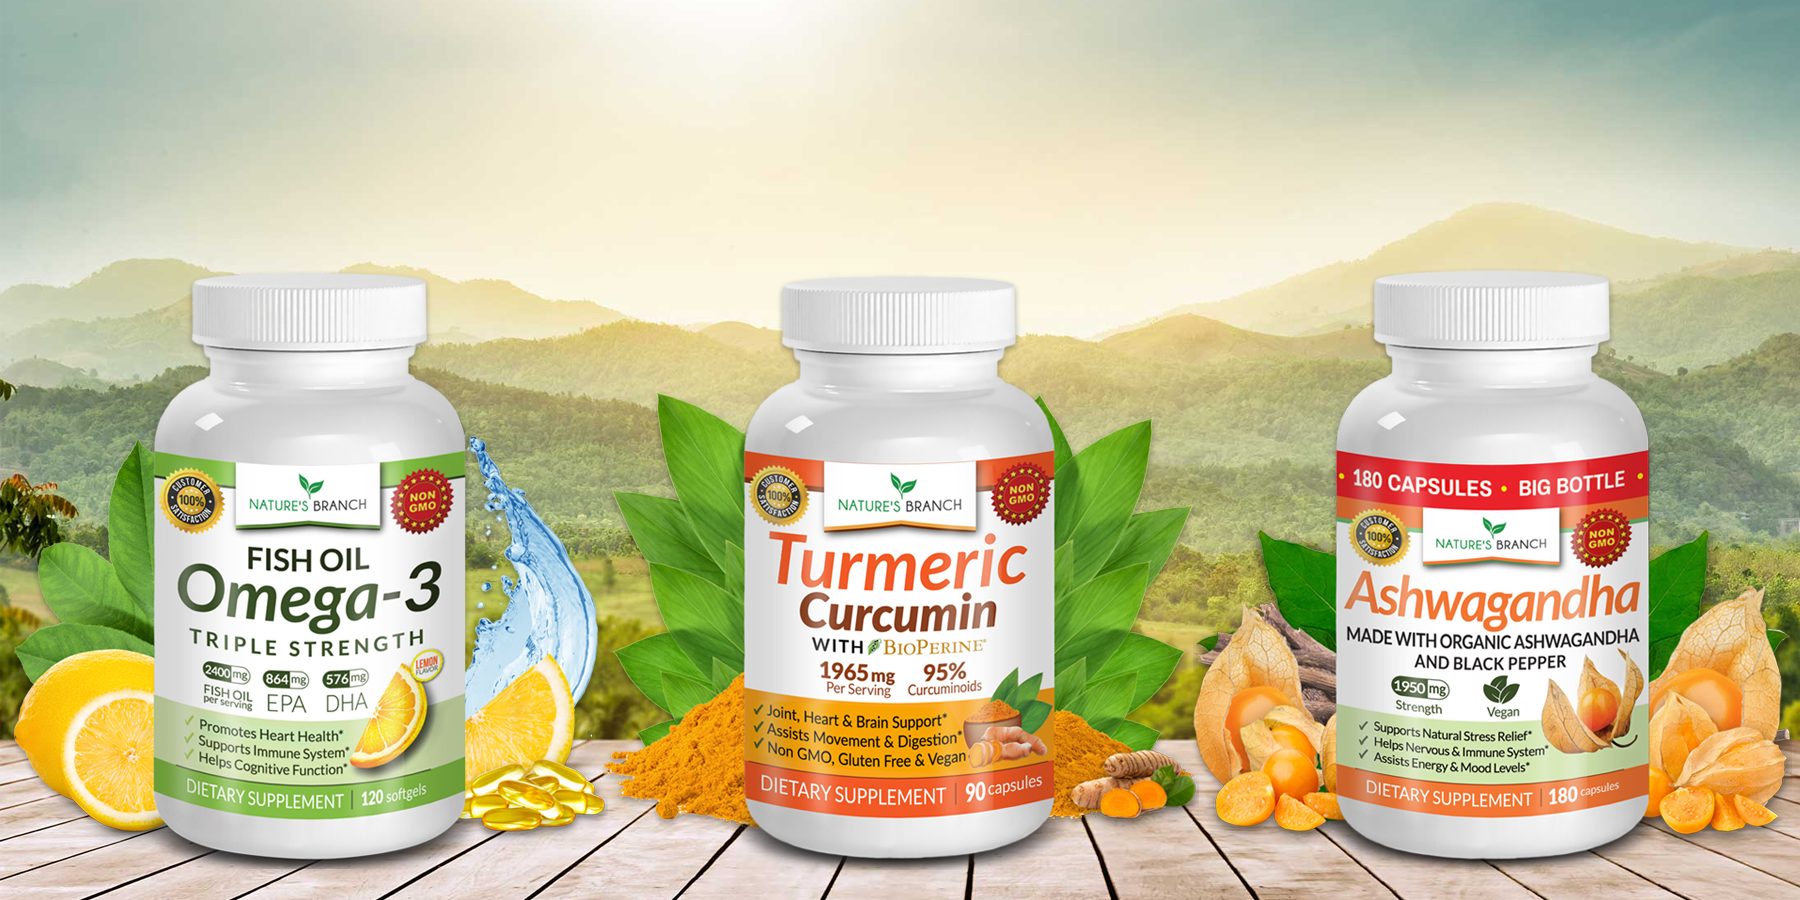 Nature's Branch Omega 3 Fish Oil Turmeric Curcumin and Ashwagandha supplement bottles on a table